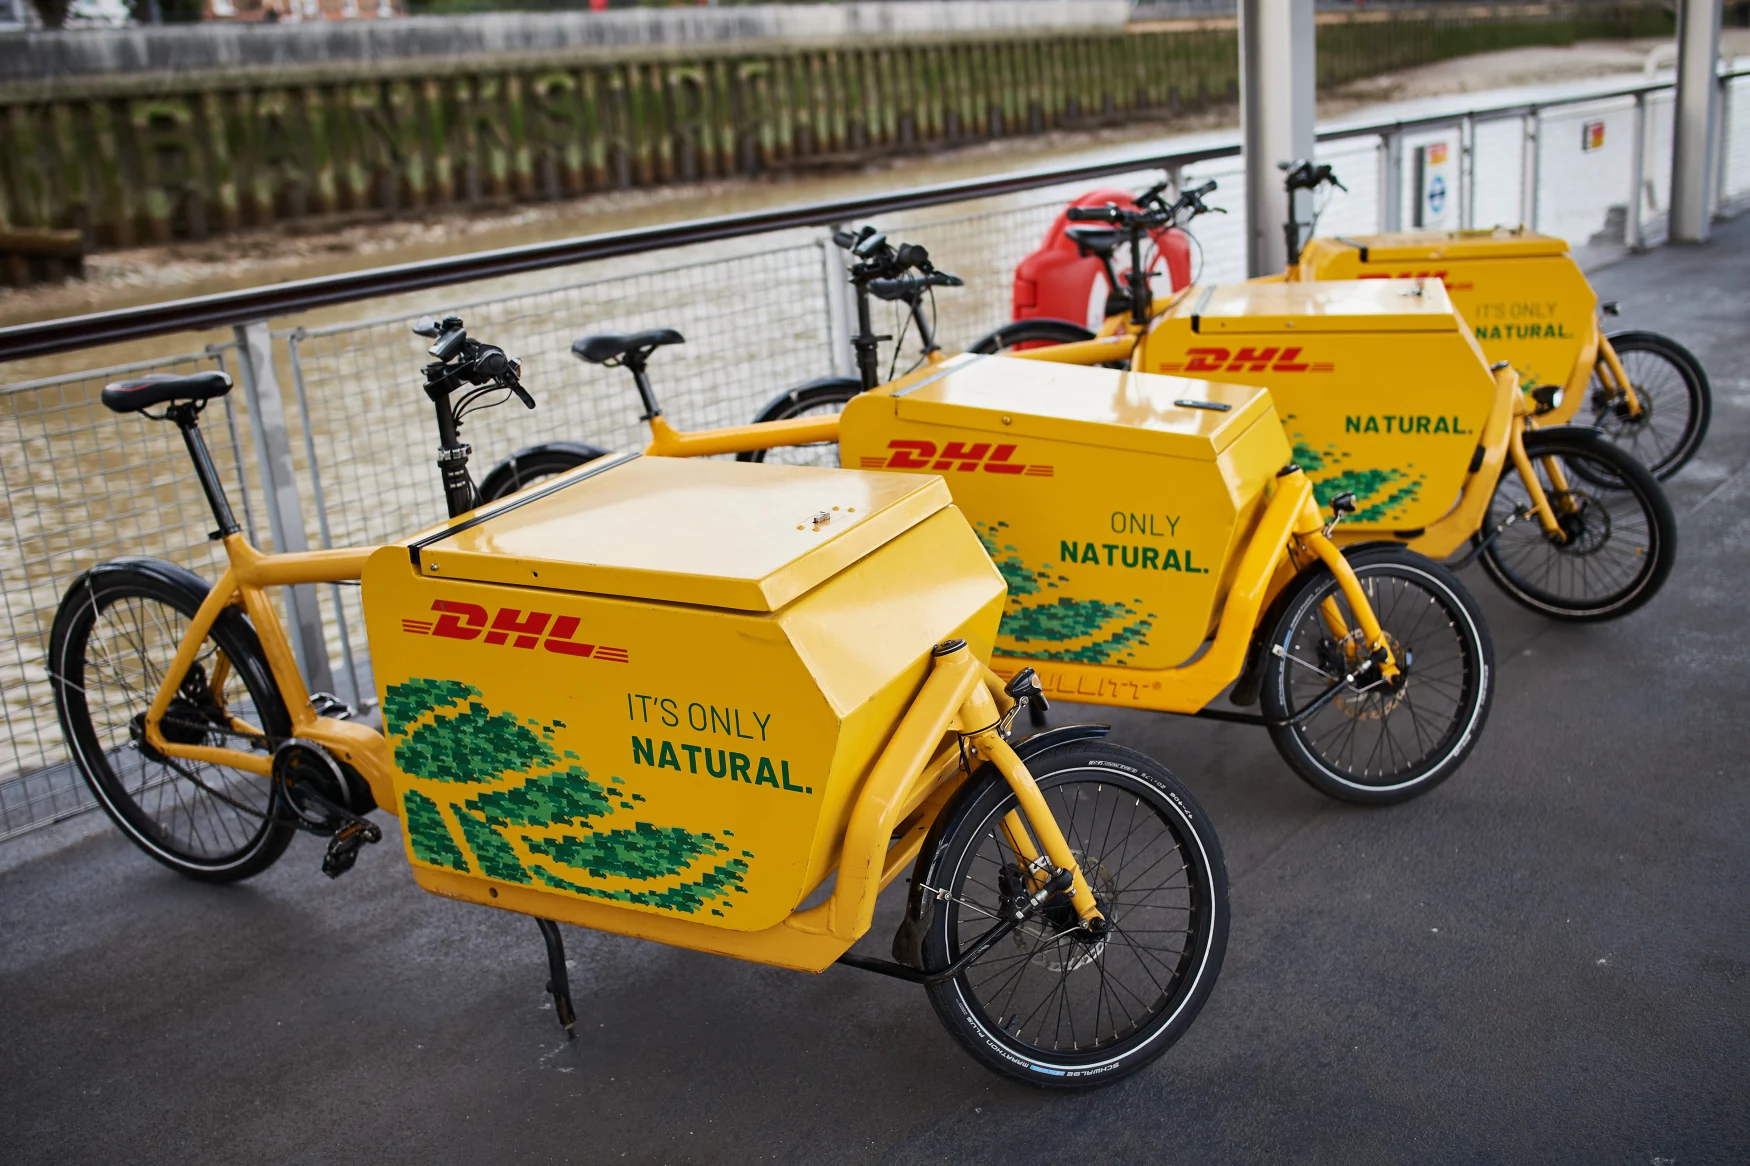 LONDON, ENGLAND - SEPTEMBER 28: A row of delivery bikes are seen as the DHL Riverboat makes its first postal delivery run from Wandsworth Pier to Bankside on September 28, 2020 in London, England. The riverboat parcel delivery service will run daily at 7:30am, with packages loaded onto the riverboat at Wandsworth Pier before travelling along the Thames into central London. The riverboat will then dock at Bankside for final-mile delivery on DHL courier bicycles. (Photo by Leon Neal/Getty Images)